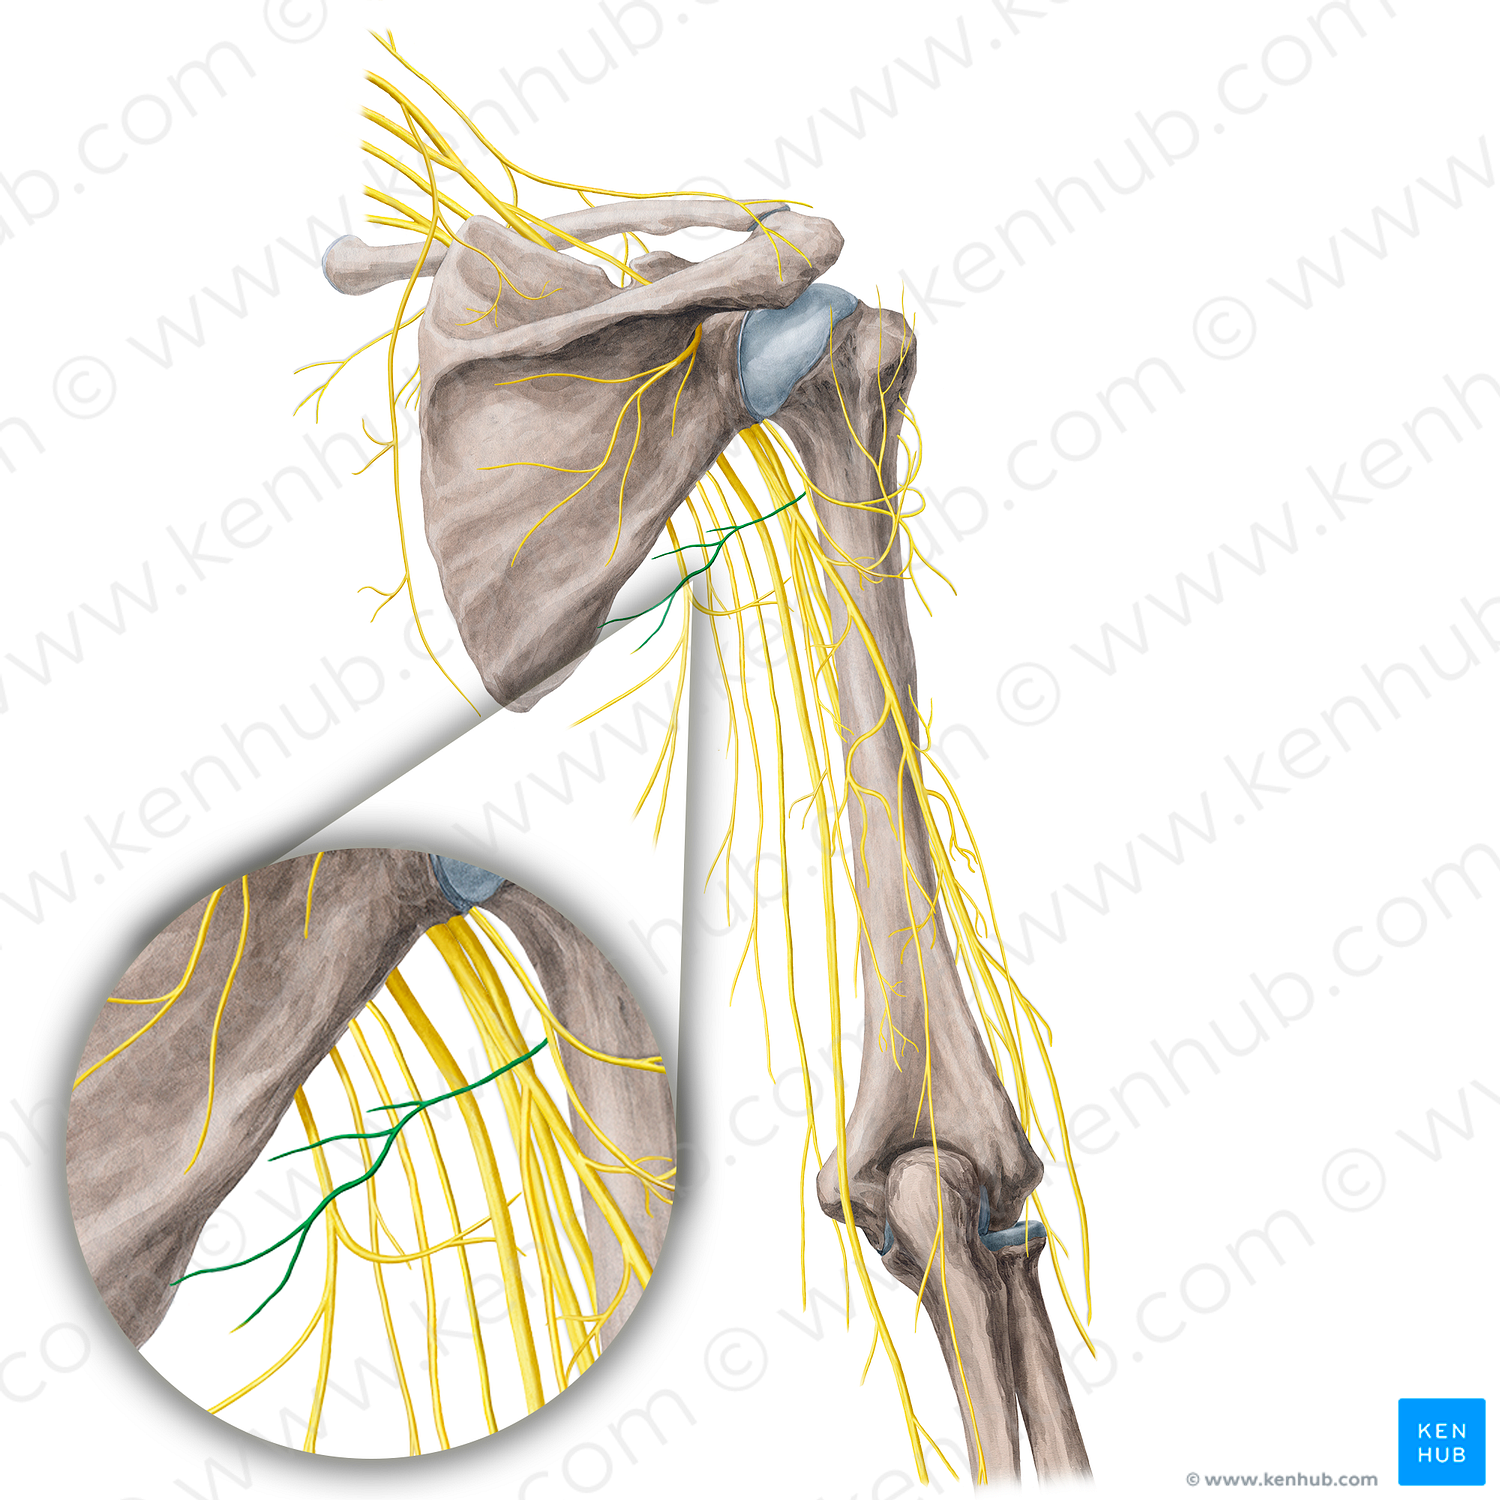 Nerve to teres minor muscle (#21762)